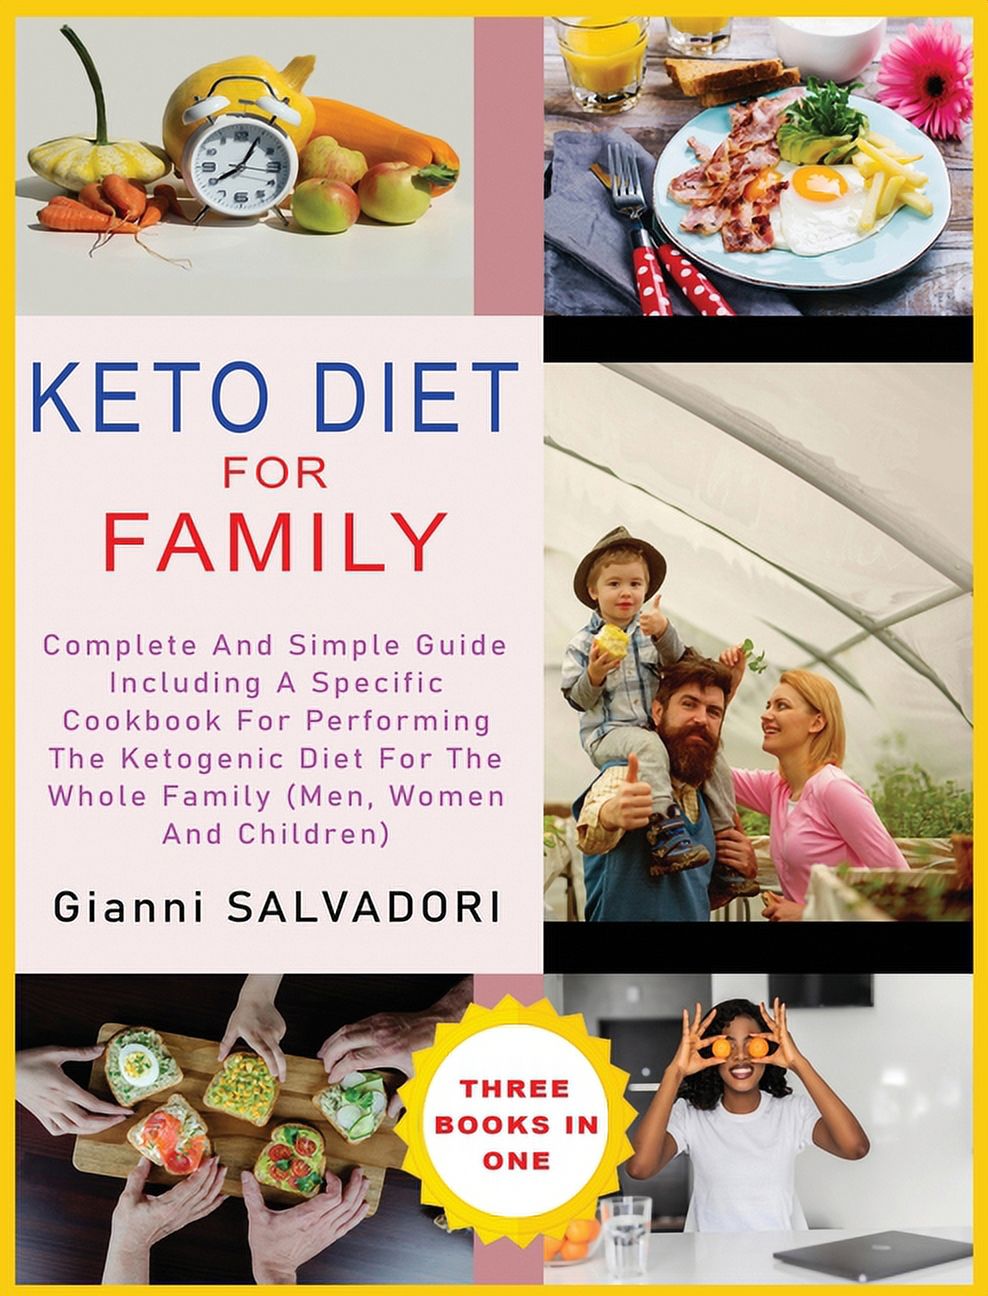 Keto Diet for Family : Complete and Simple Guide Including a Specific Cookbook for Performing the Ketogenic Diet for the Whole Family (Men, Women and Children) Three Books in One (Hardcover) - image 1 of 1